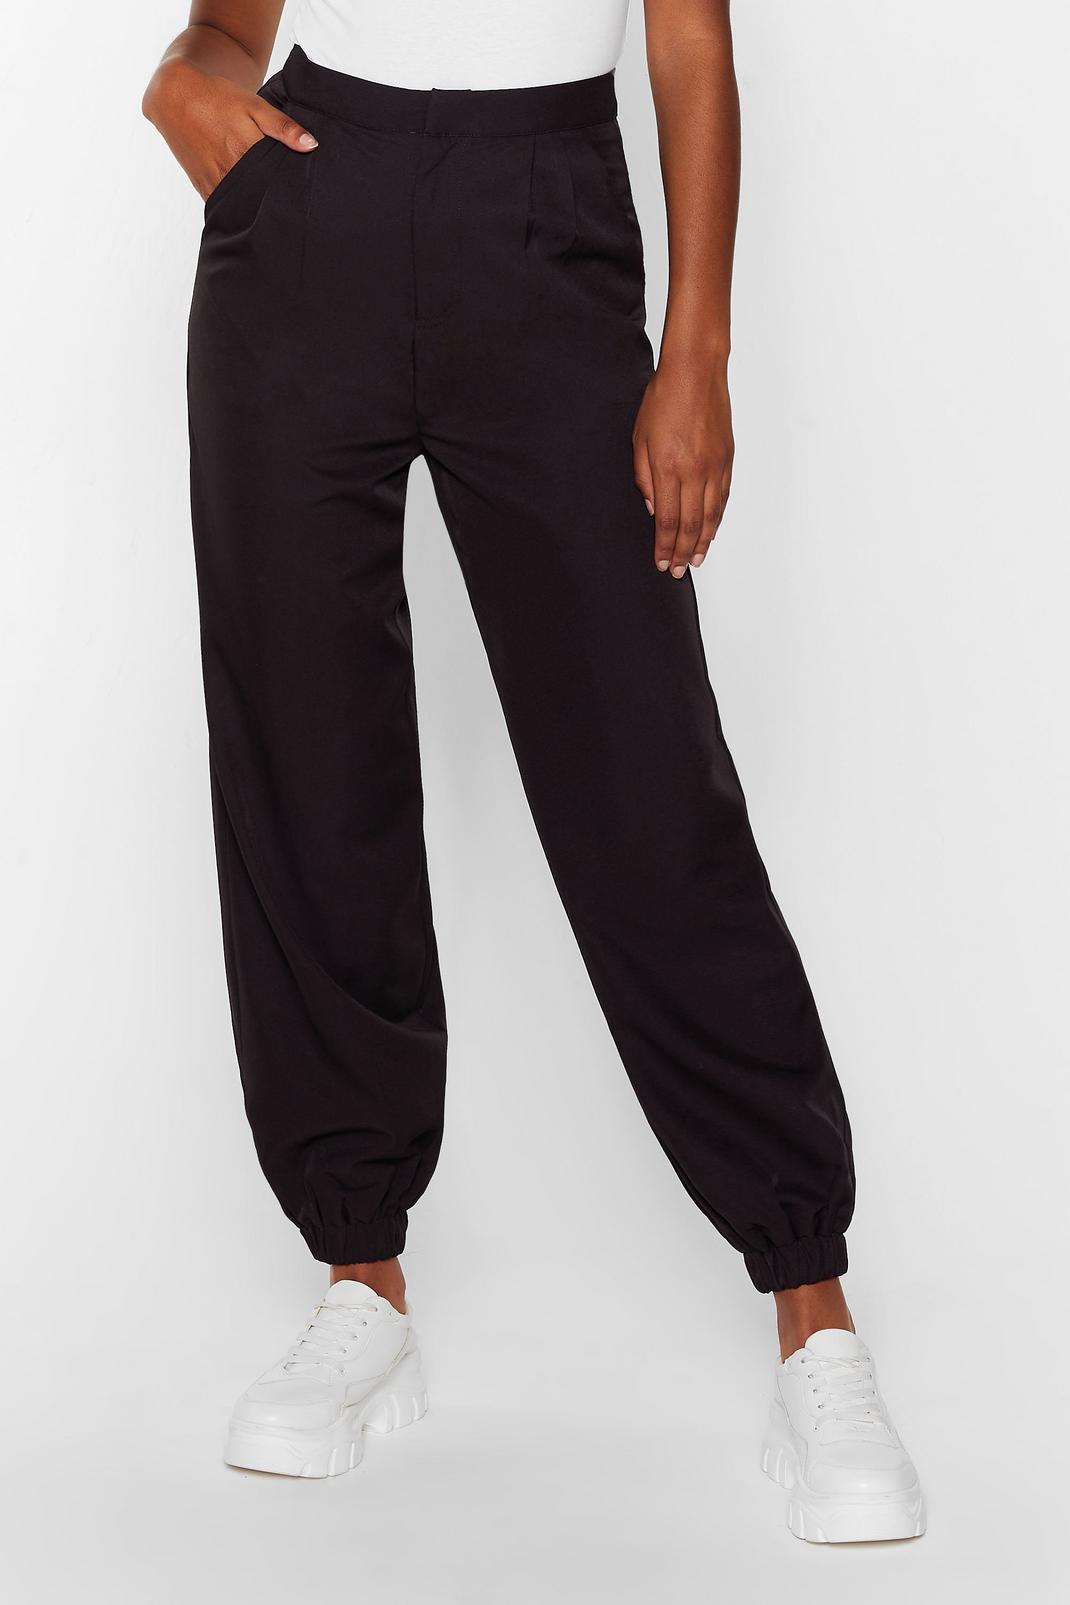 Tie and Find Out High-Waisted Jogger Pants image number 1